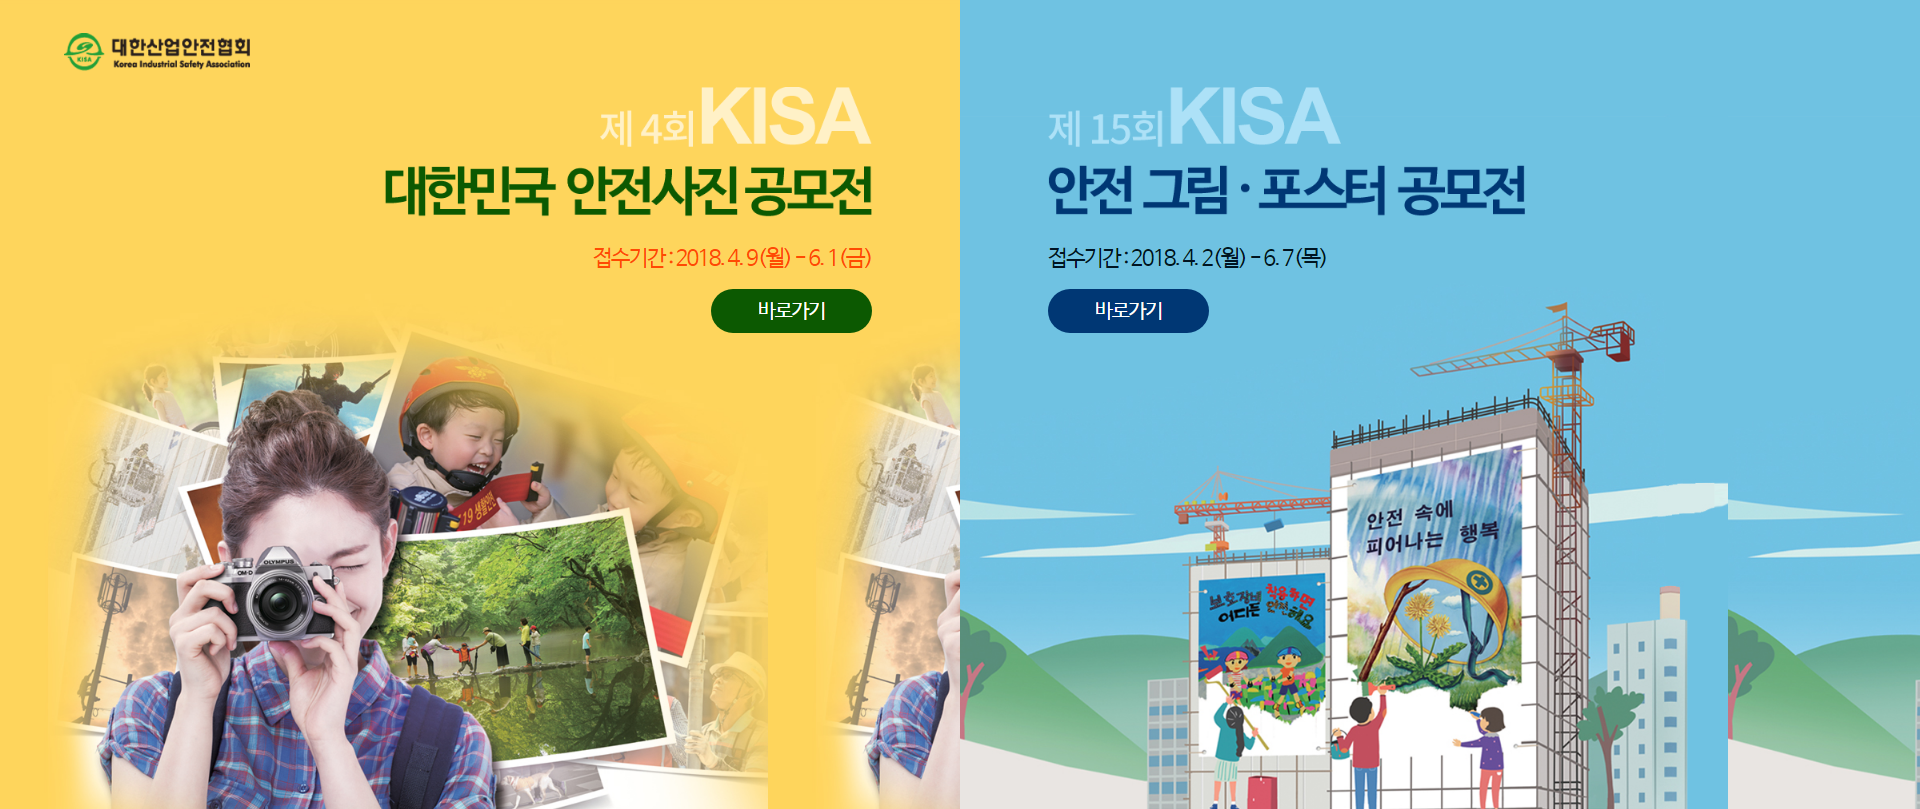 You are currently viewing 제15회 KISA 안전그림 포스터 공모전 개최